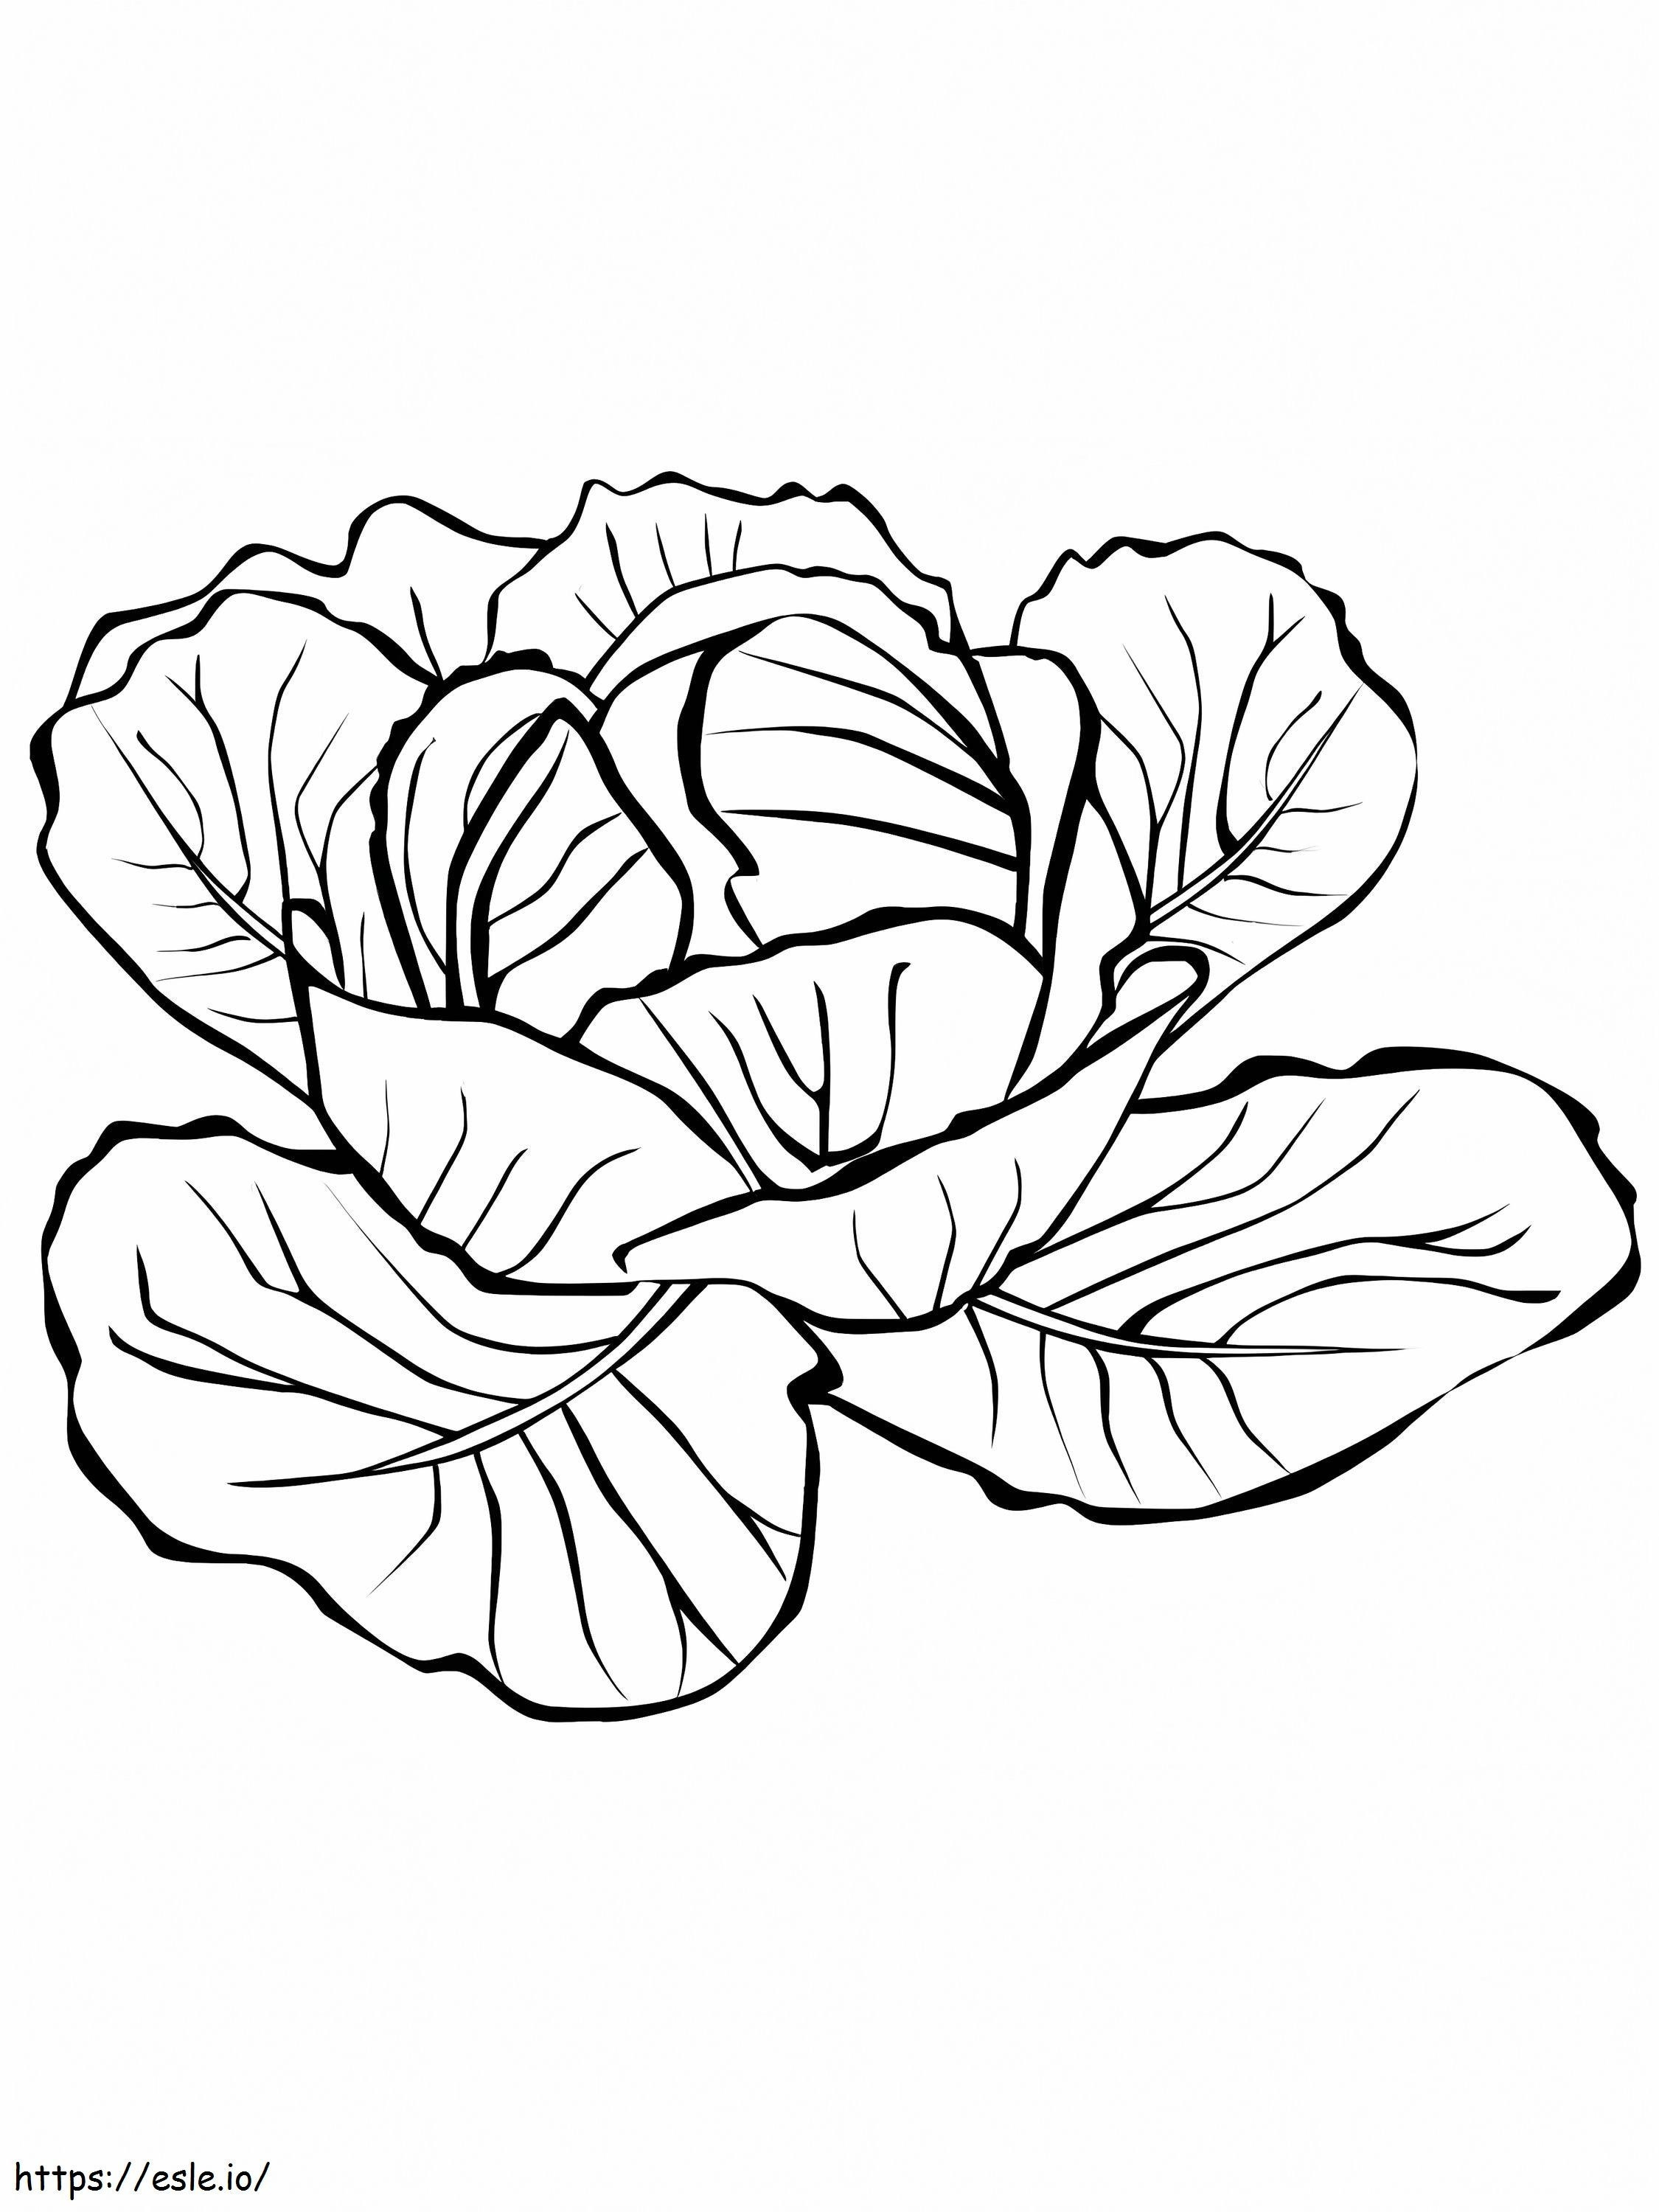 Cabbage 1 coloring page